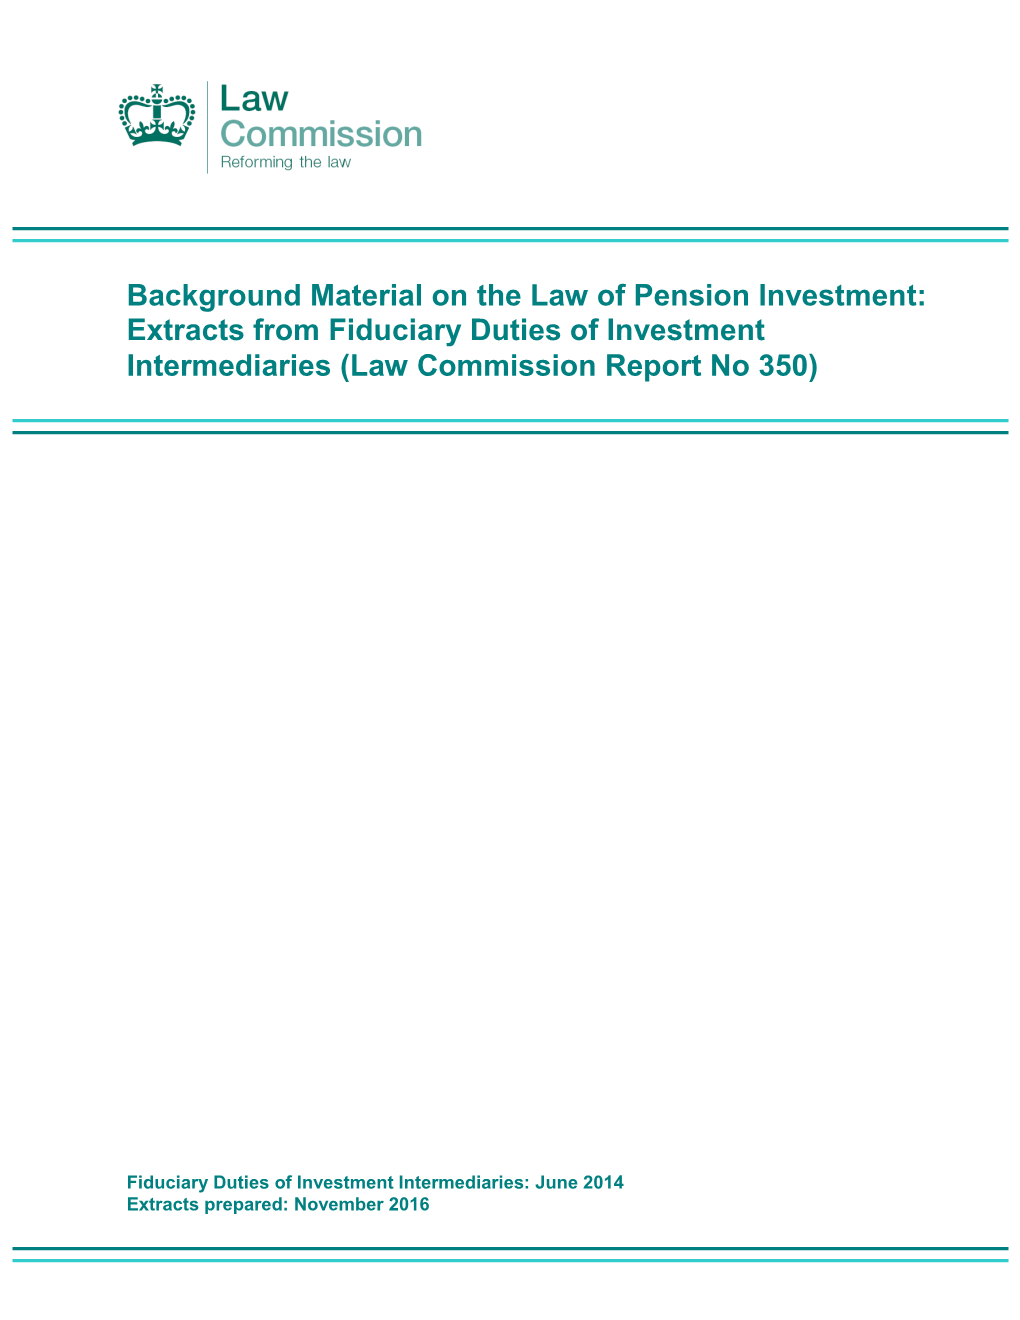 Extracts from Fiduciary Duties of Investment Intermediaries (Law Commission Report No 350)